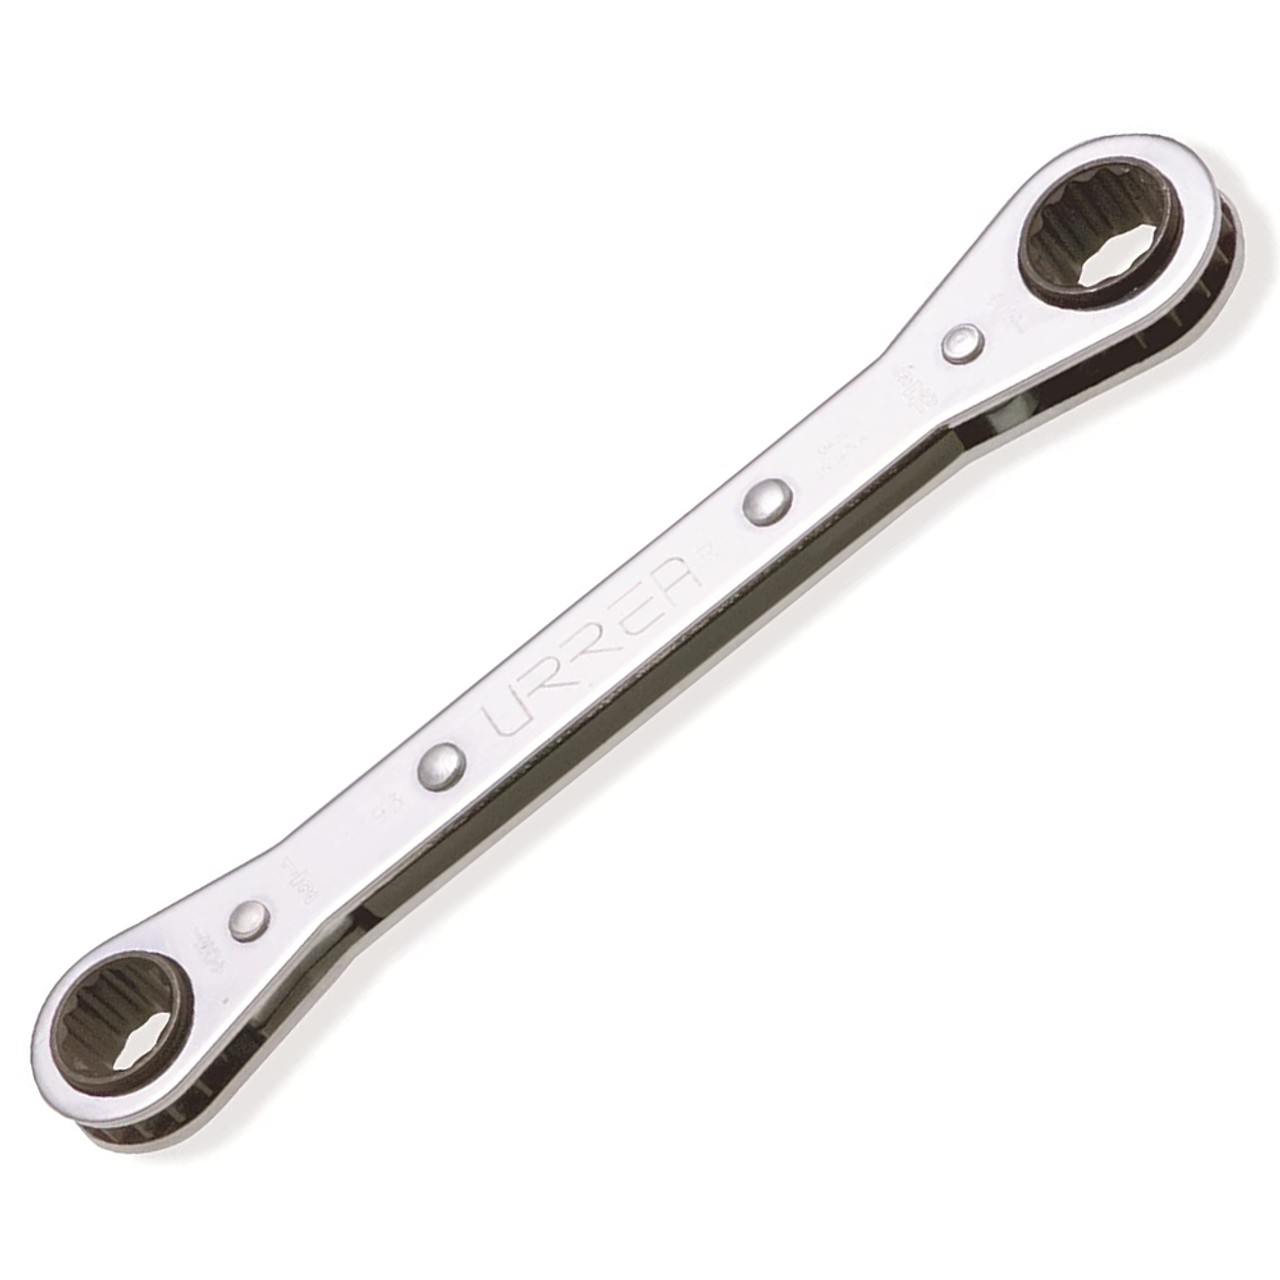 Metric Flat Ratcheting Box-End wrench, Size: 9x 10mm,12 Point ,Total Length: 5-1/2"